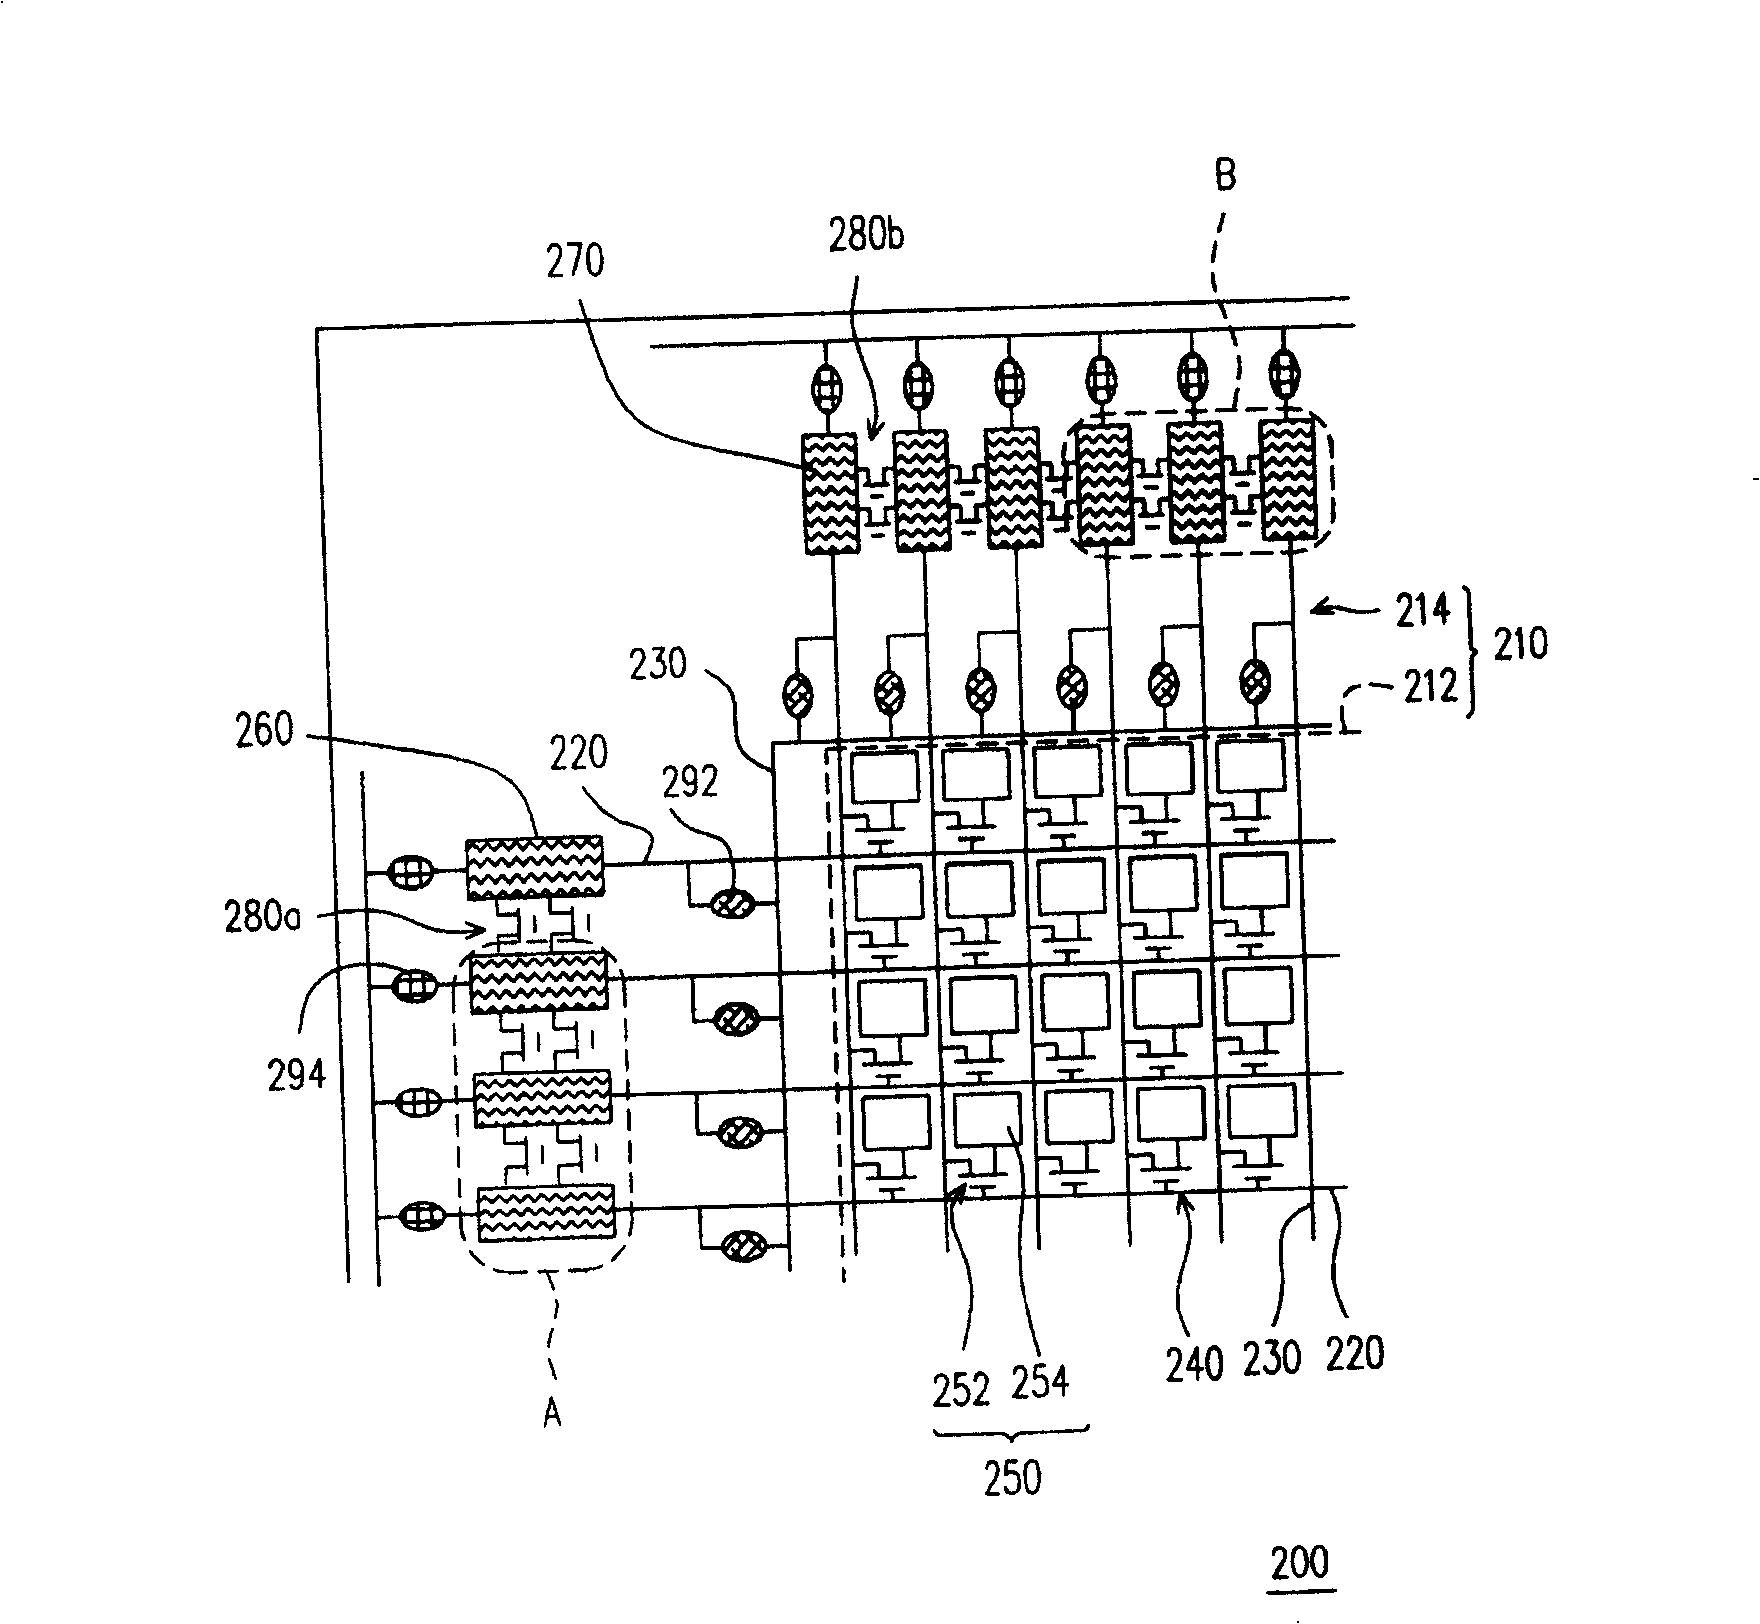 Thin film transistor array substrate and liquid crystal dispaly panel